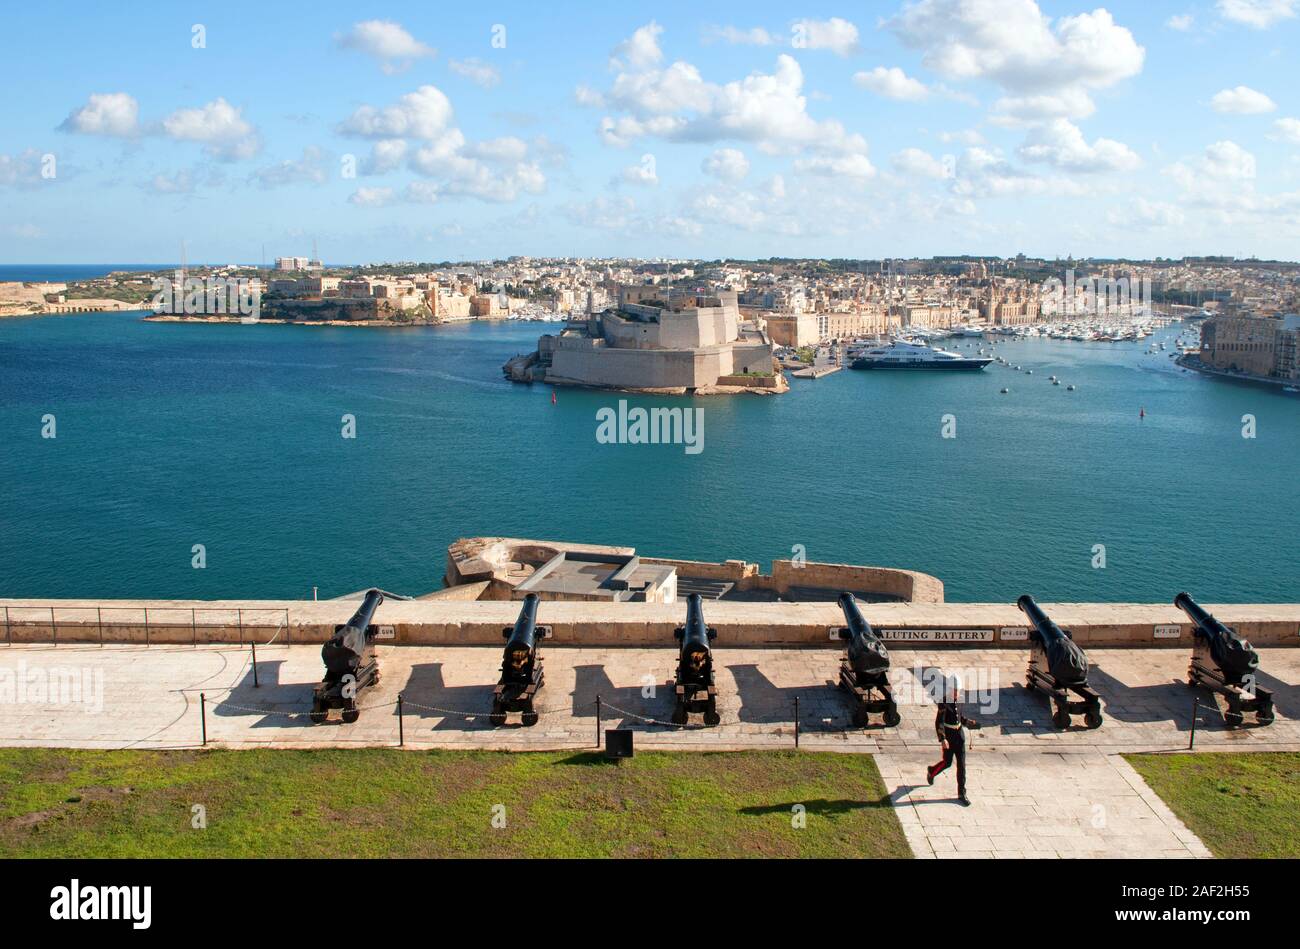 Cannons at the saluting battery, Upper Barracca Gardens, overlooking the harbour in Valletta, Malta Stock Photo